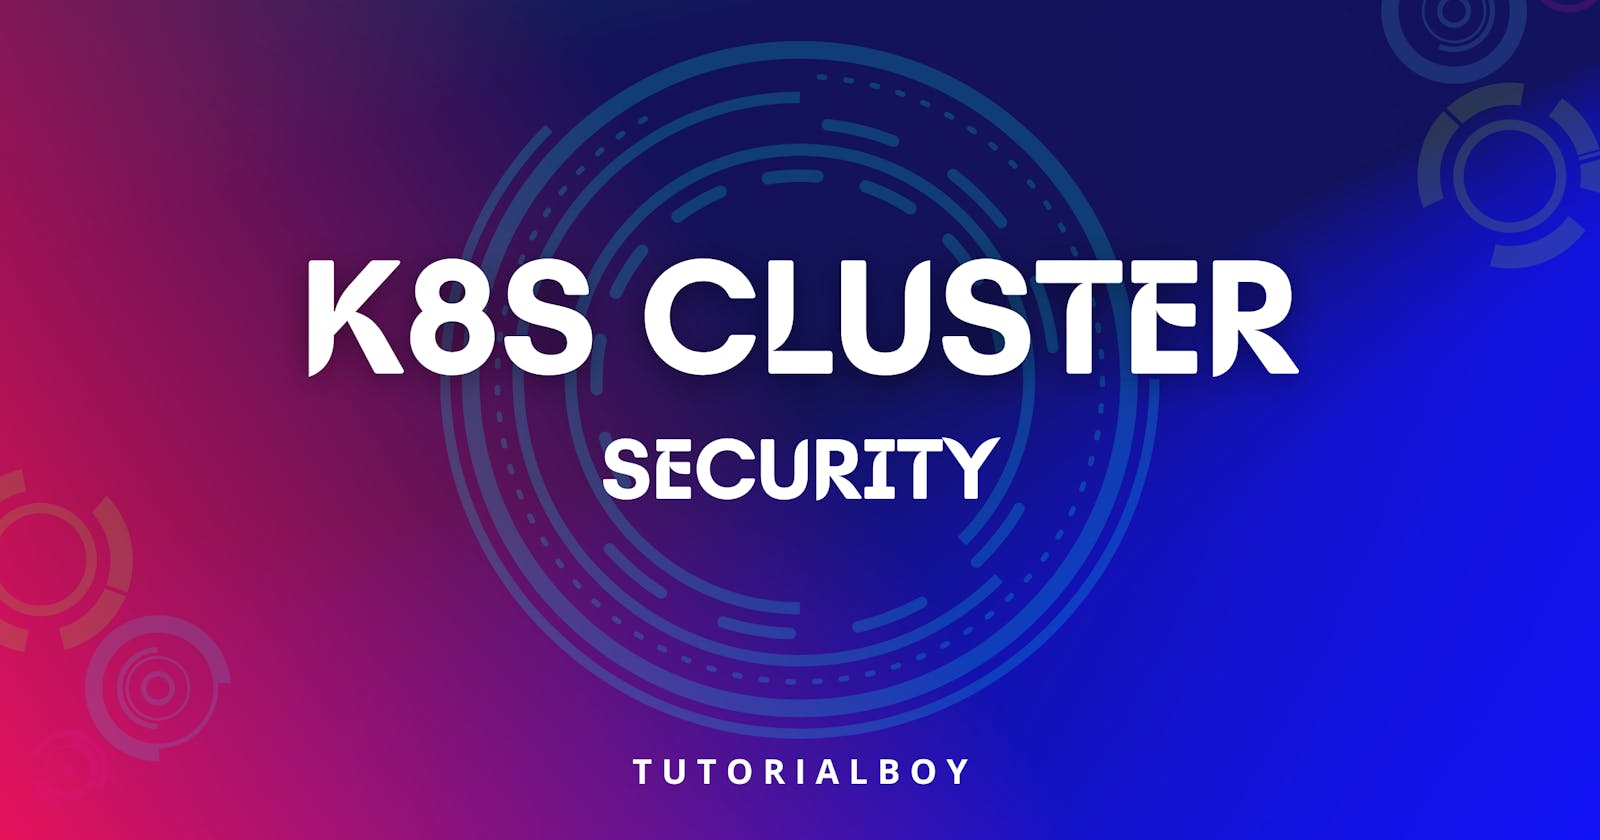 A Detailed Talk about K8S Cluster Security from the Perspective of Attackers (Part 2)